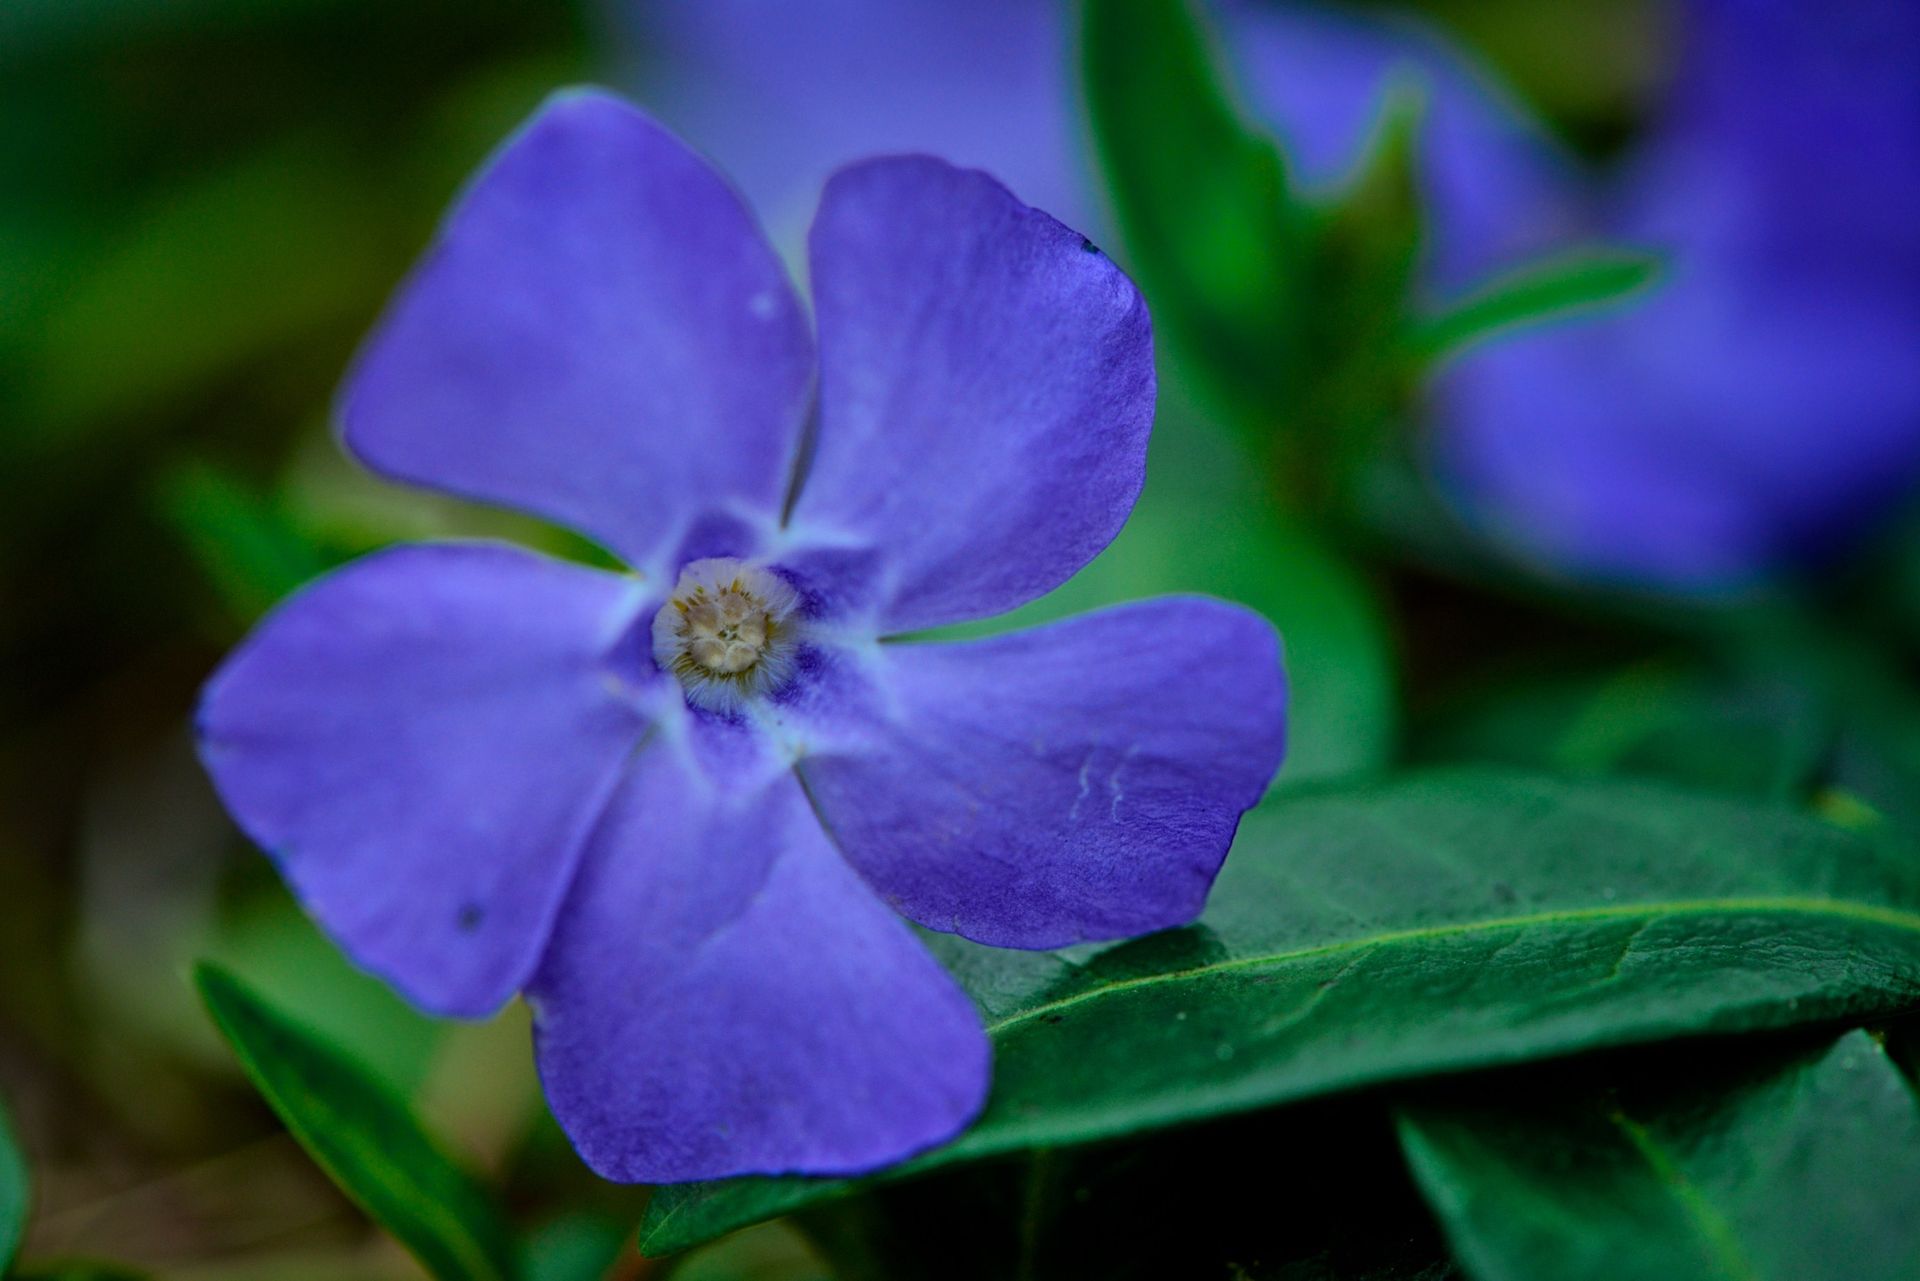 A vinca, also known as periwinkle.